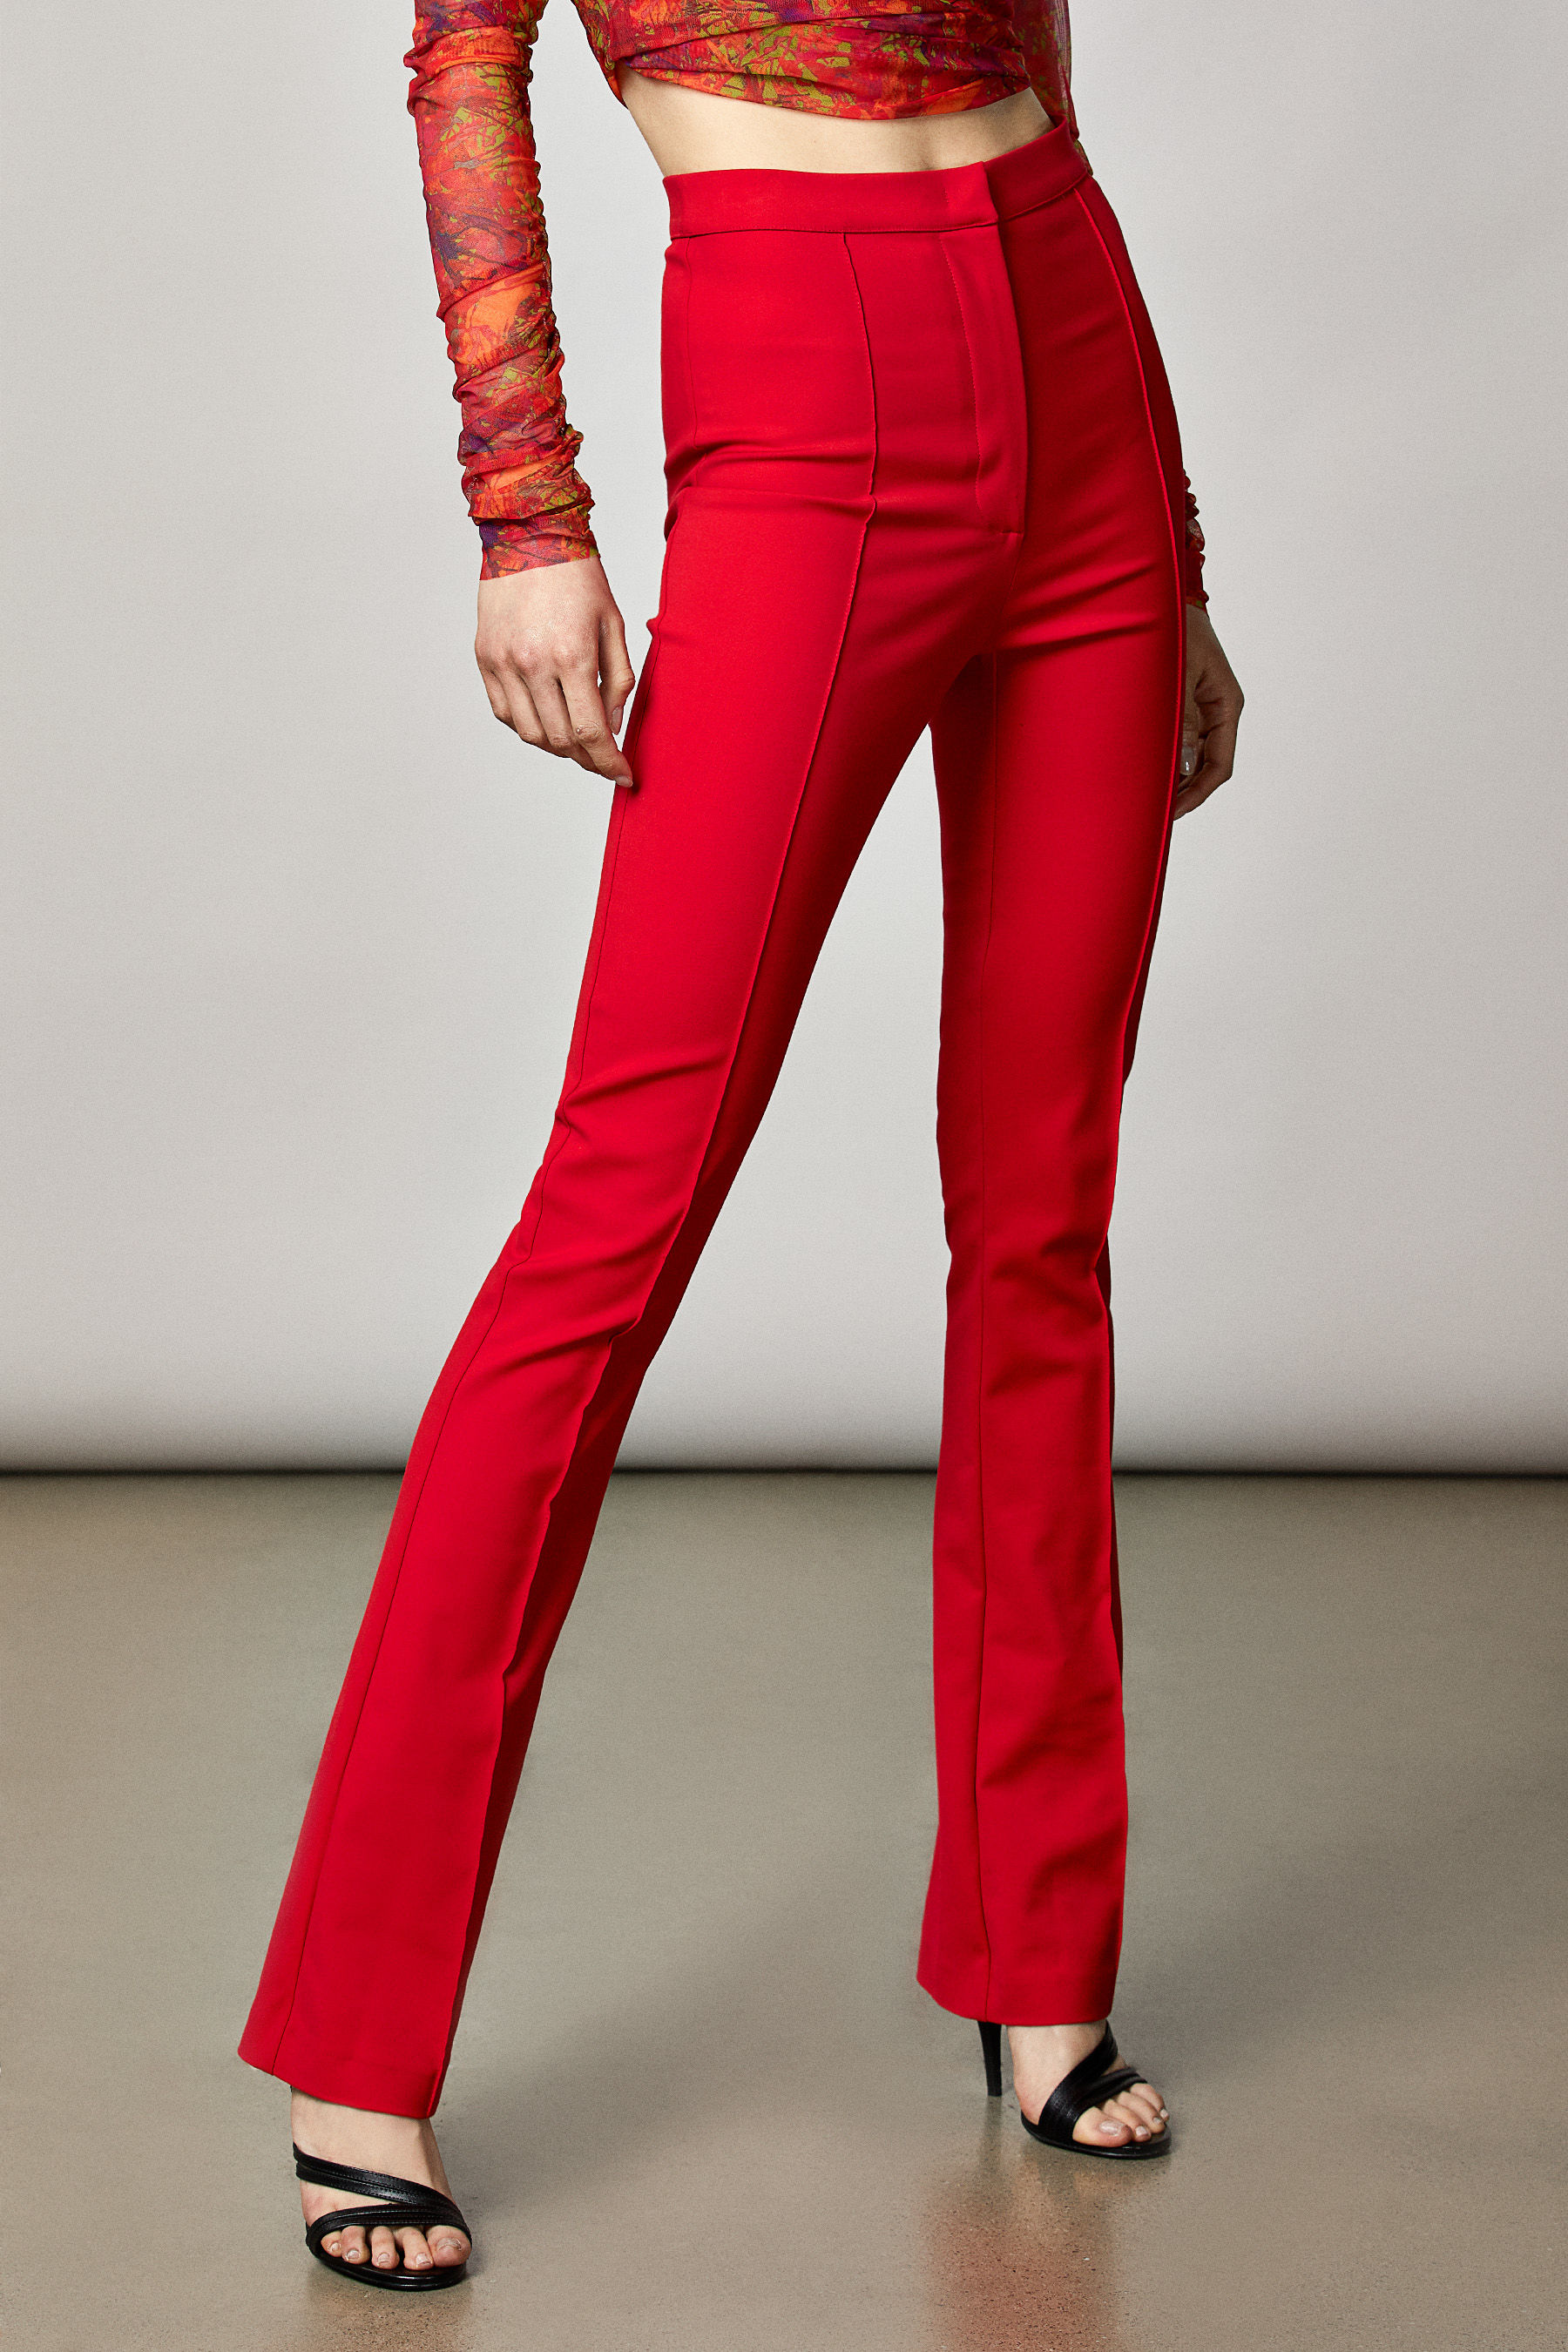 Red Flare Jeans 62 Red Dress  Red flare Bright outfits Red flare pants  outfit